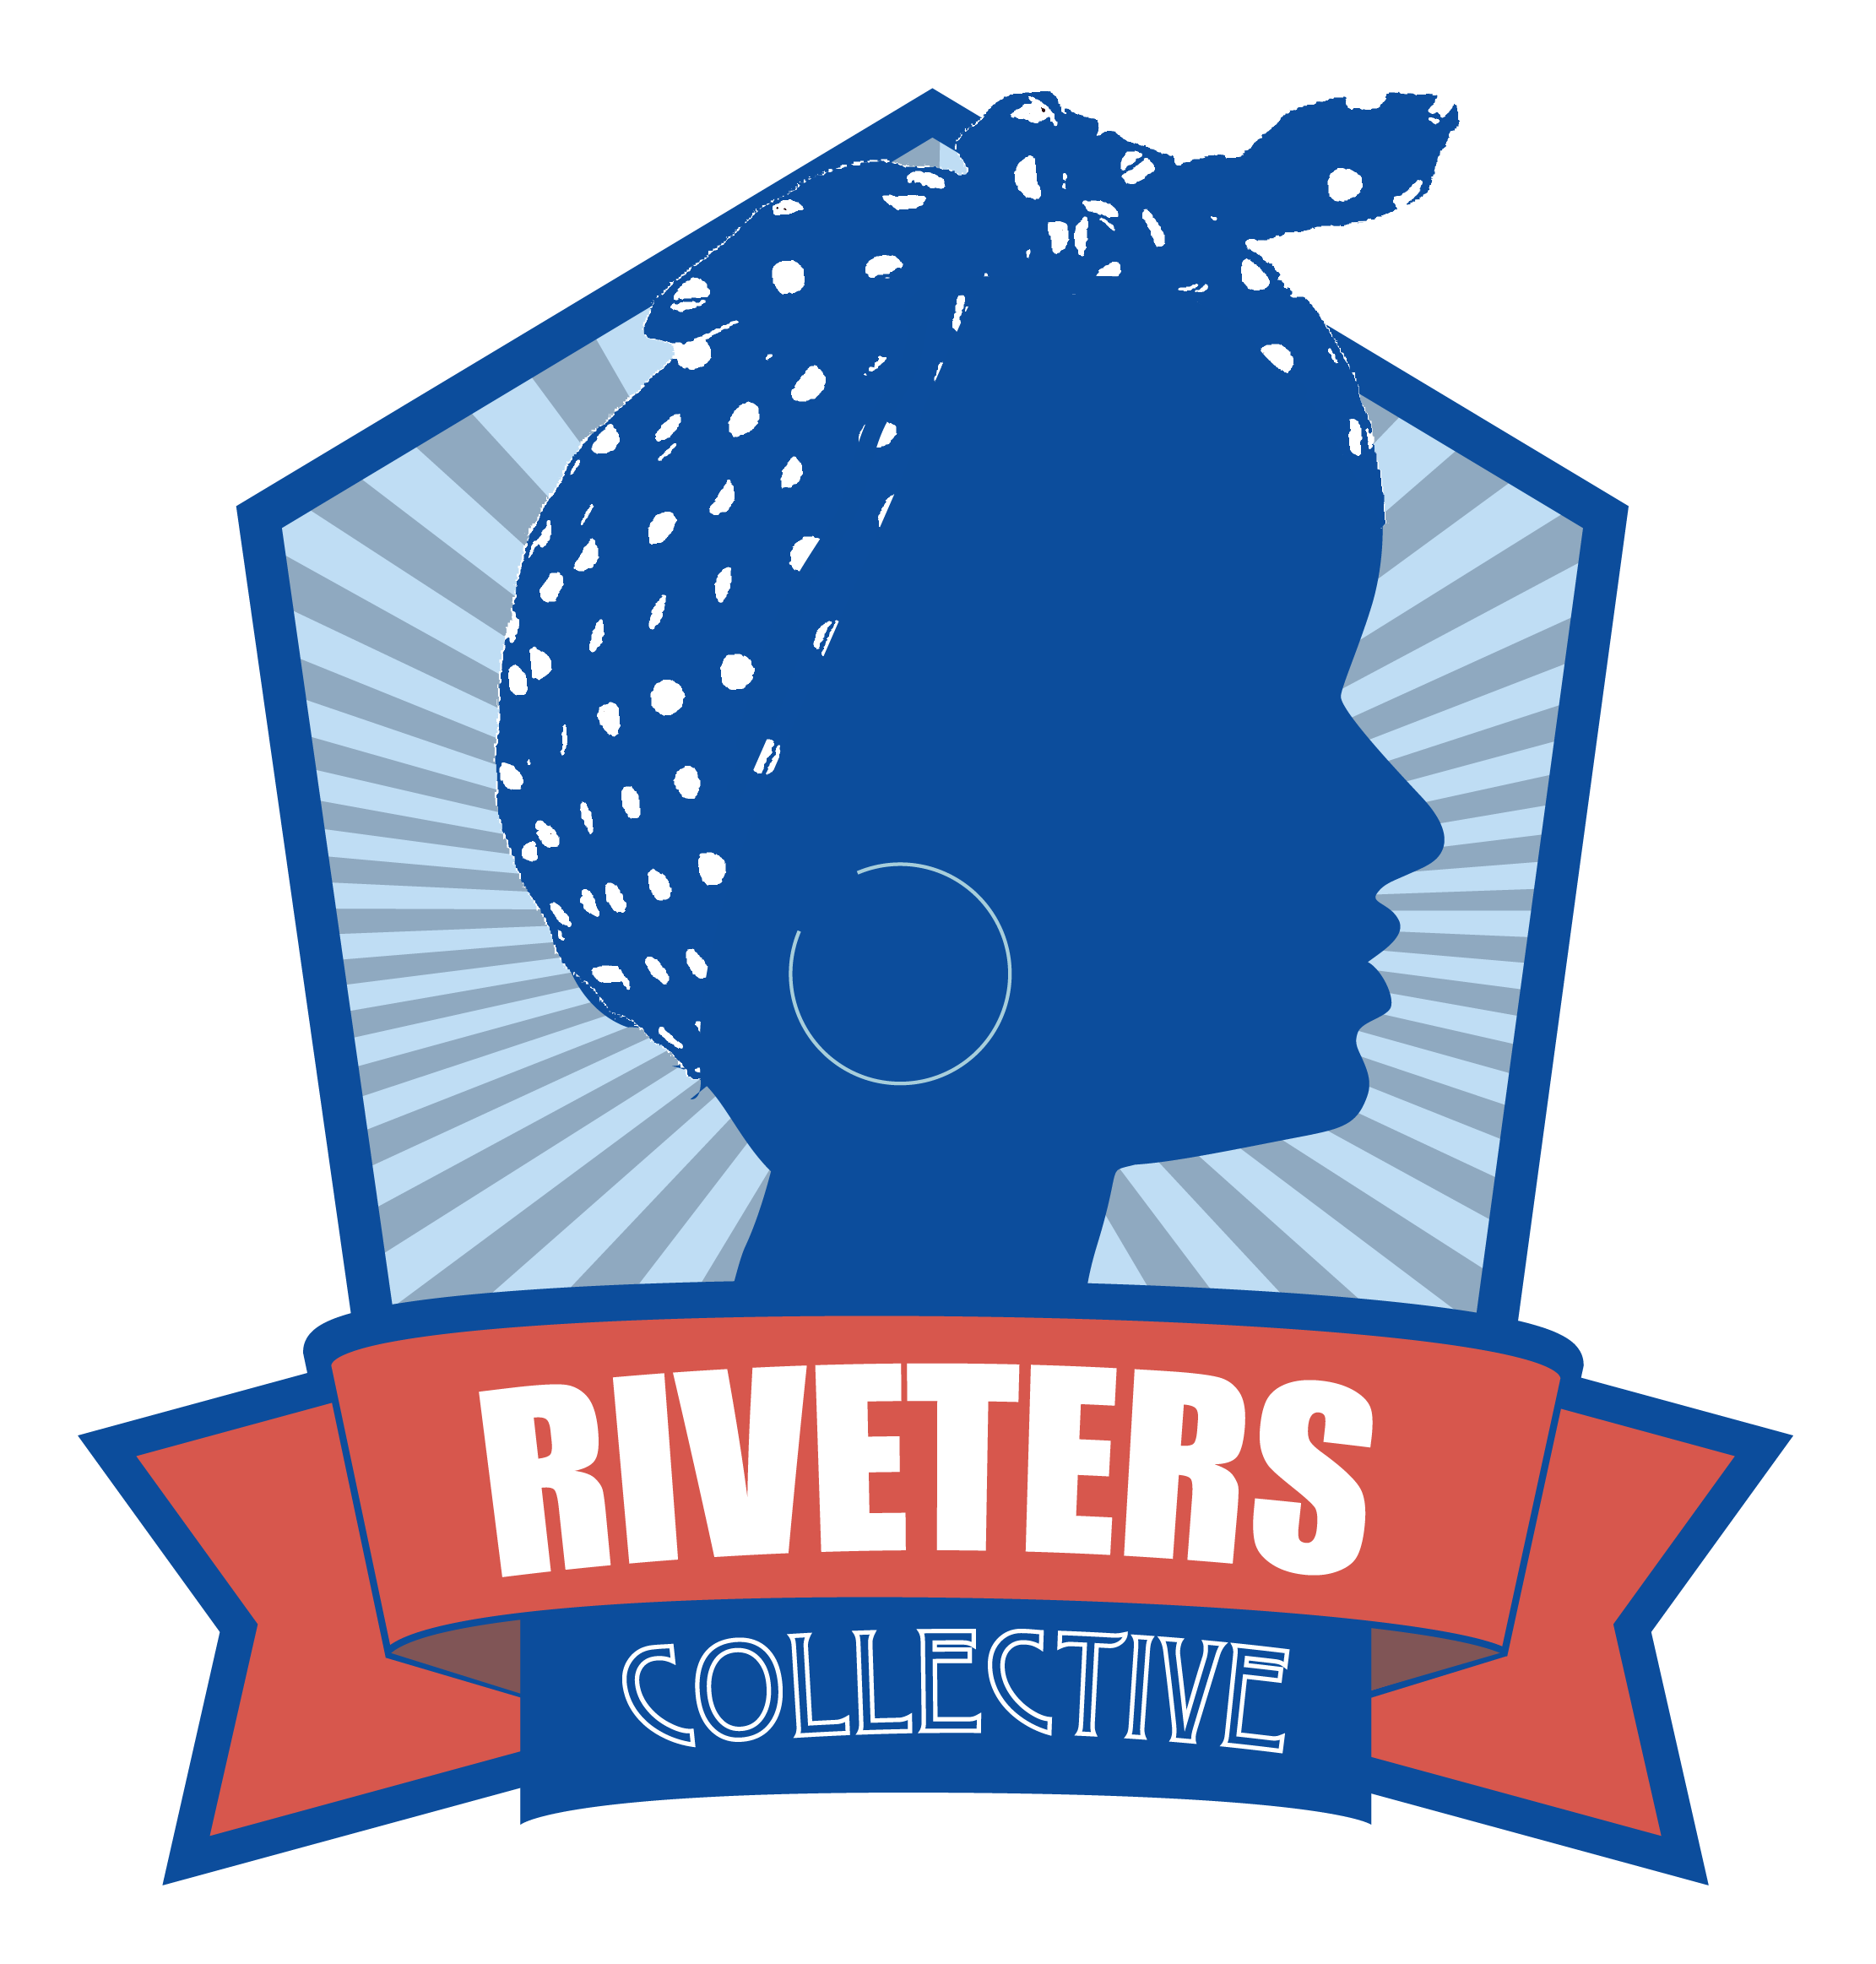 Riveters Collective